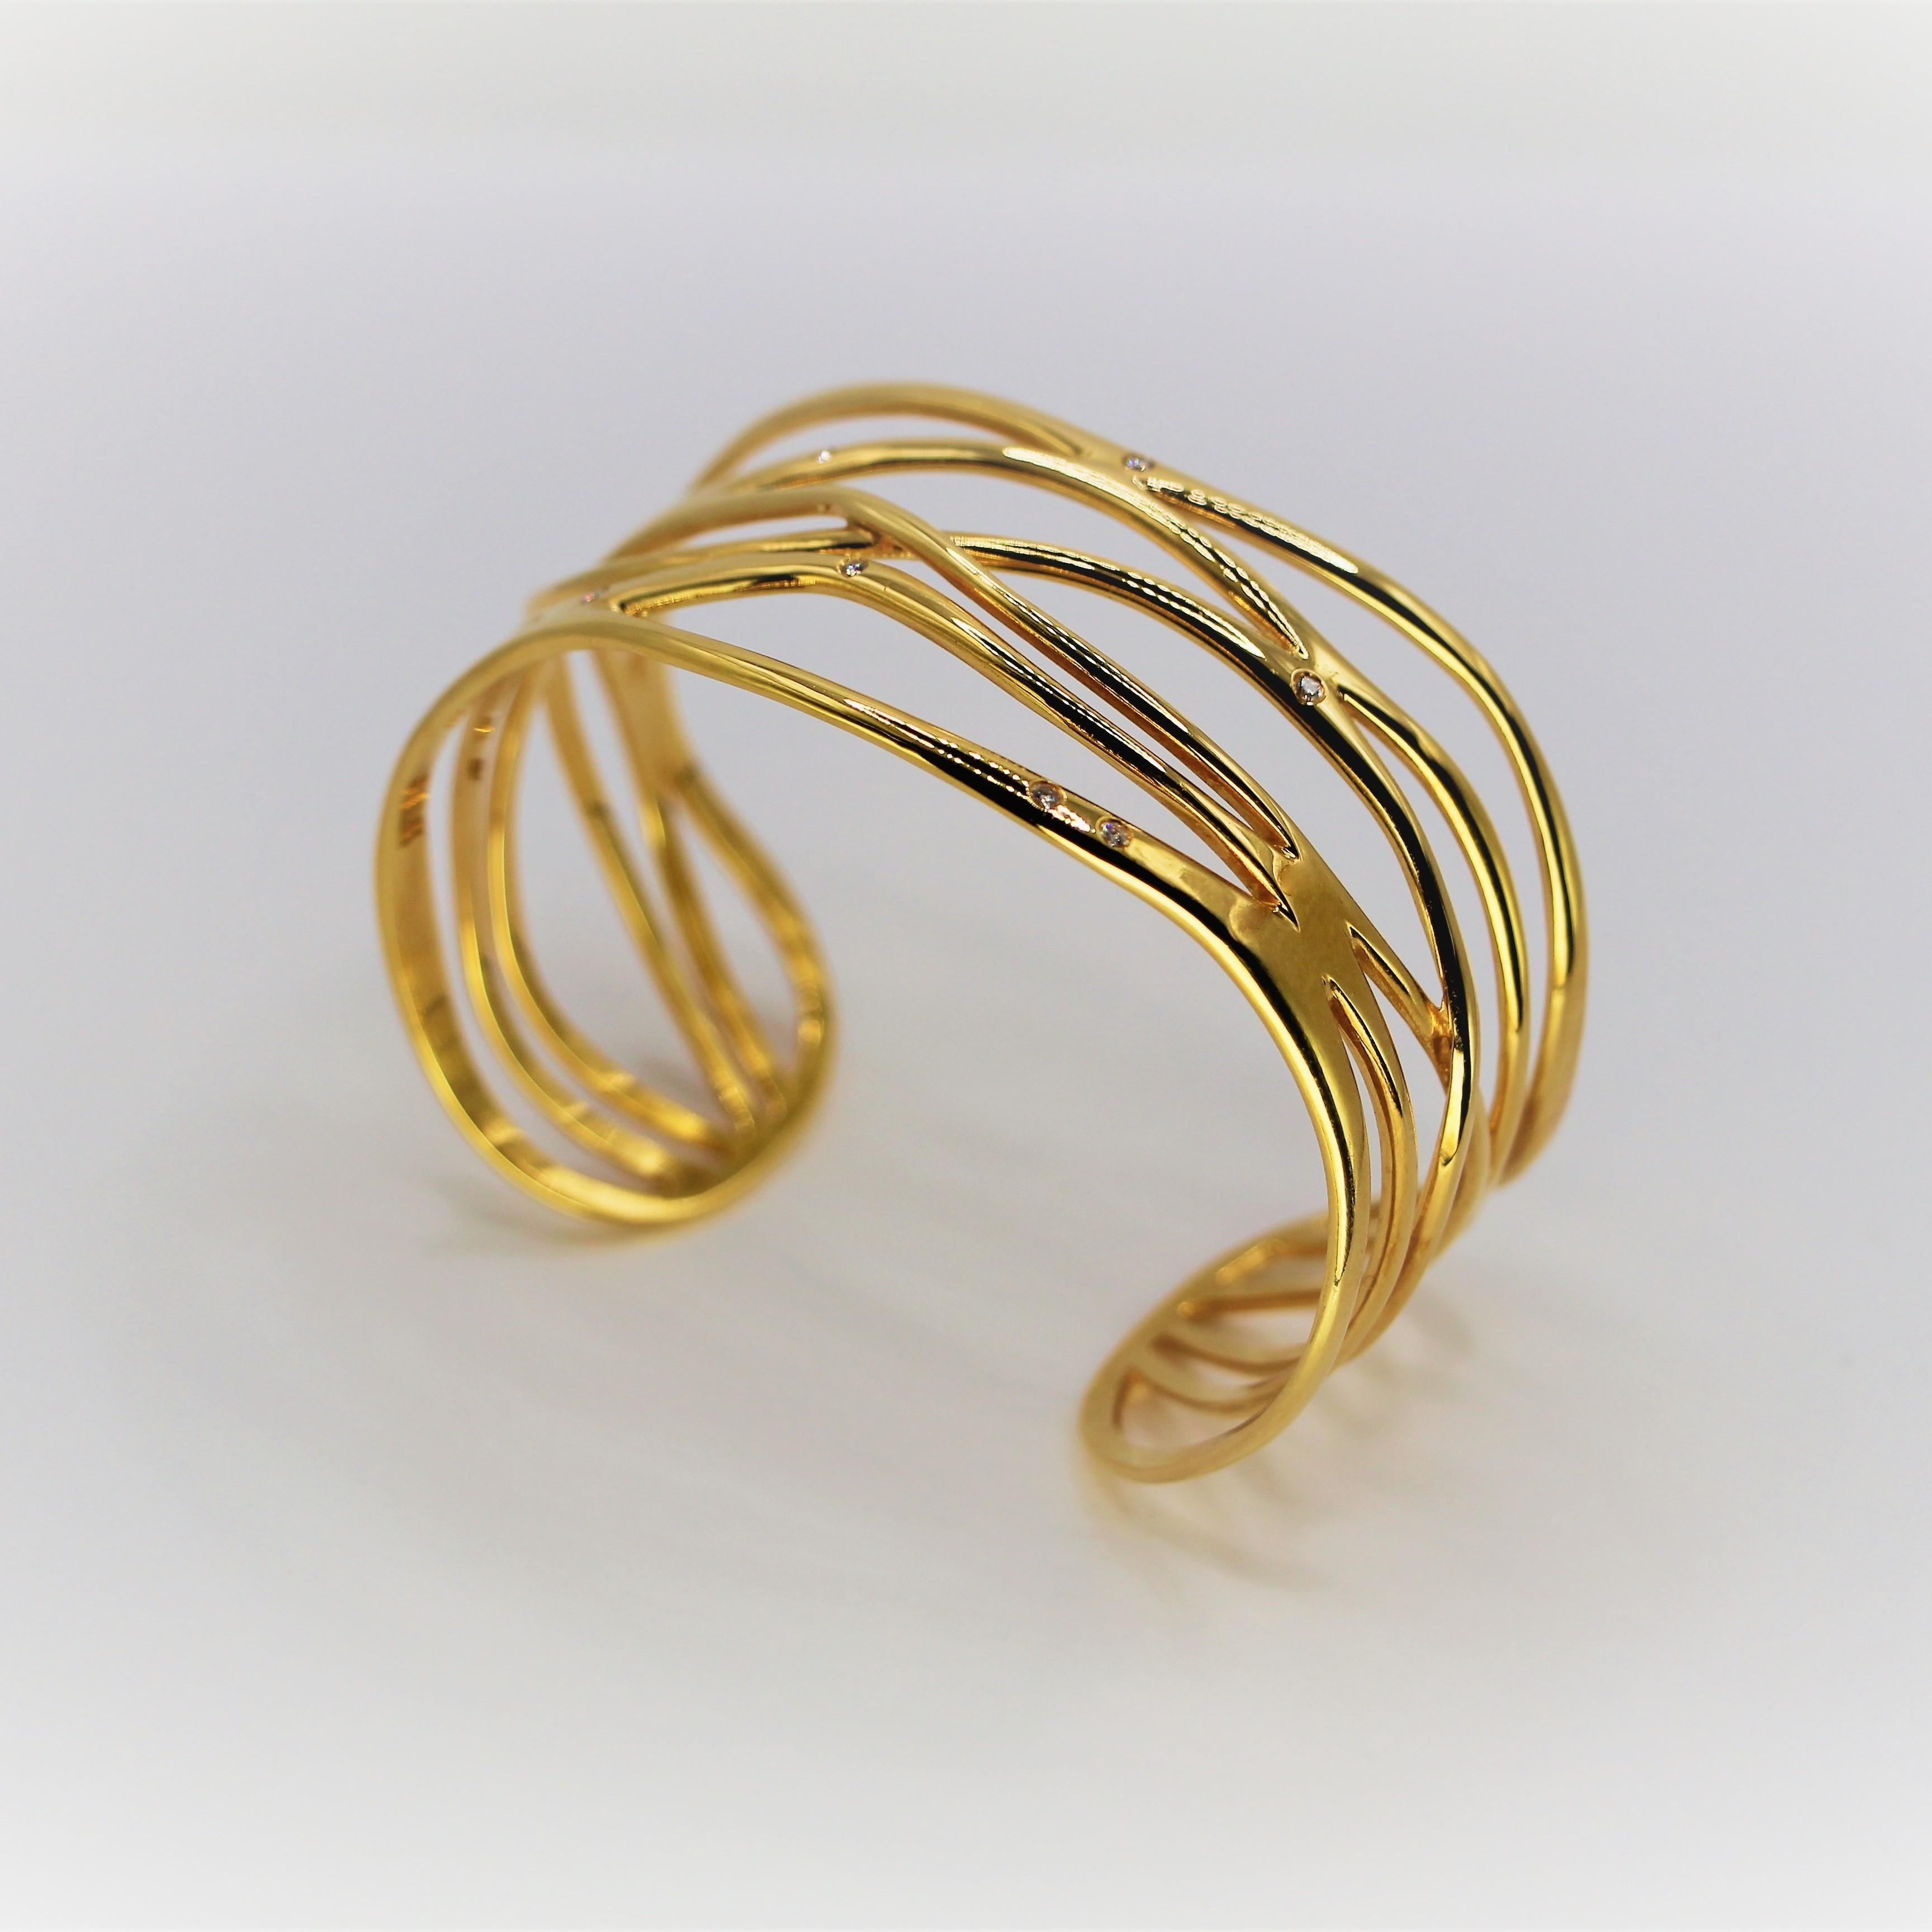 Contemporary Waves Cage Cuff Bangle Bracelet White Brilliant Cut Diamonds 18Kt Yellow Gold For Sale